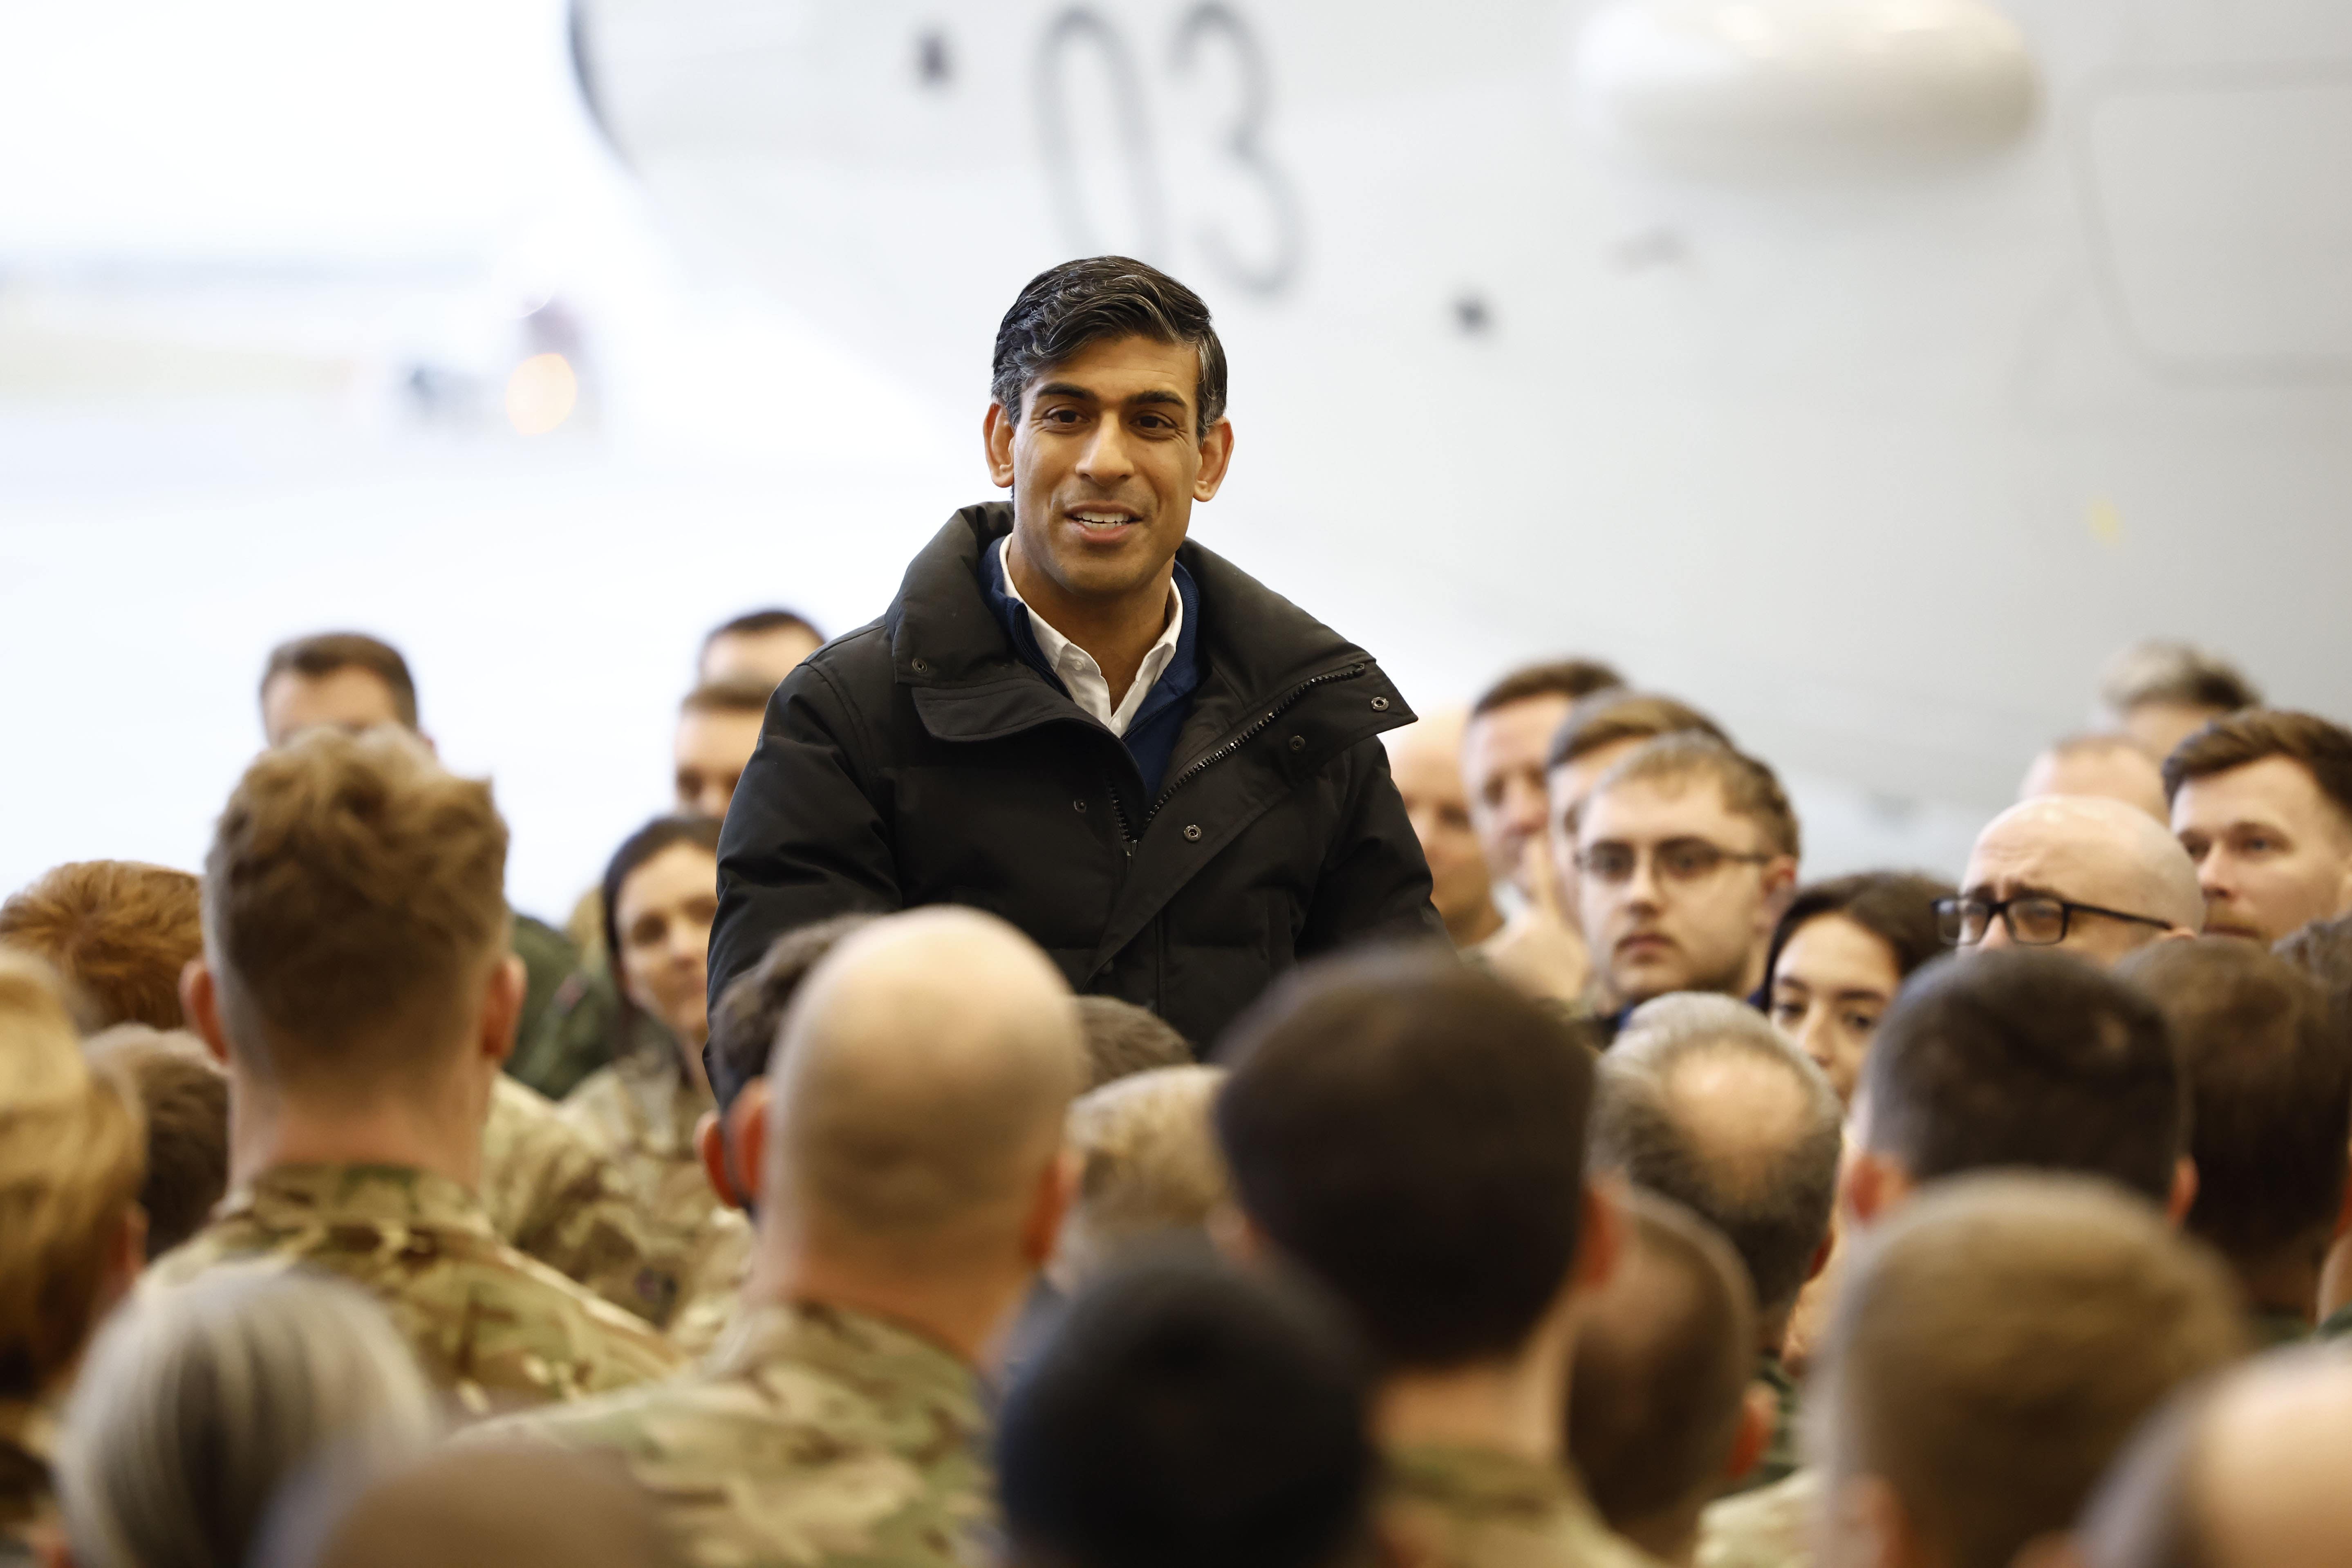 Rishi Sunak has proposed the introduction of national service for 18-year-olds